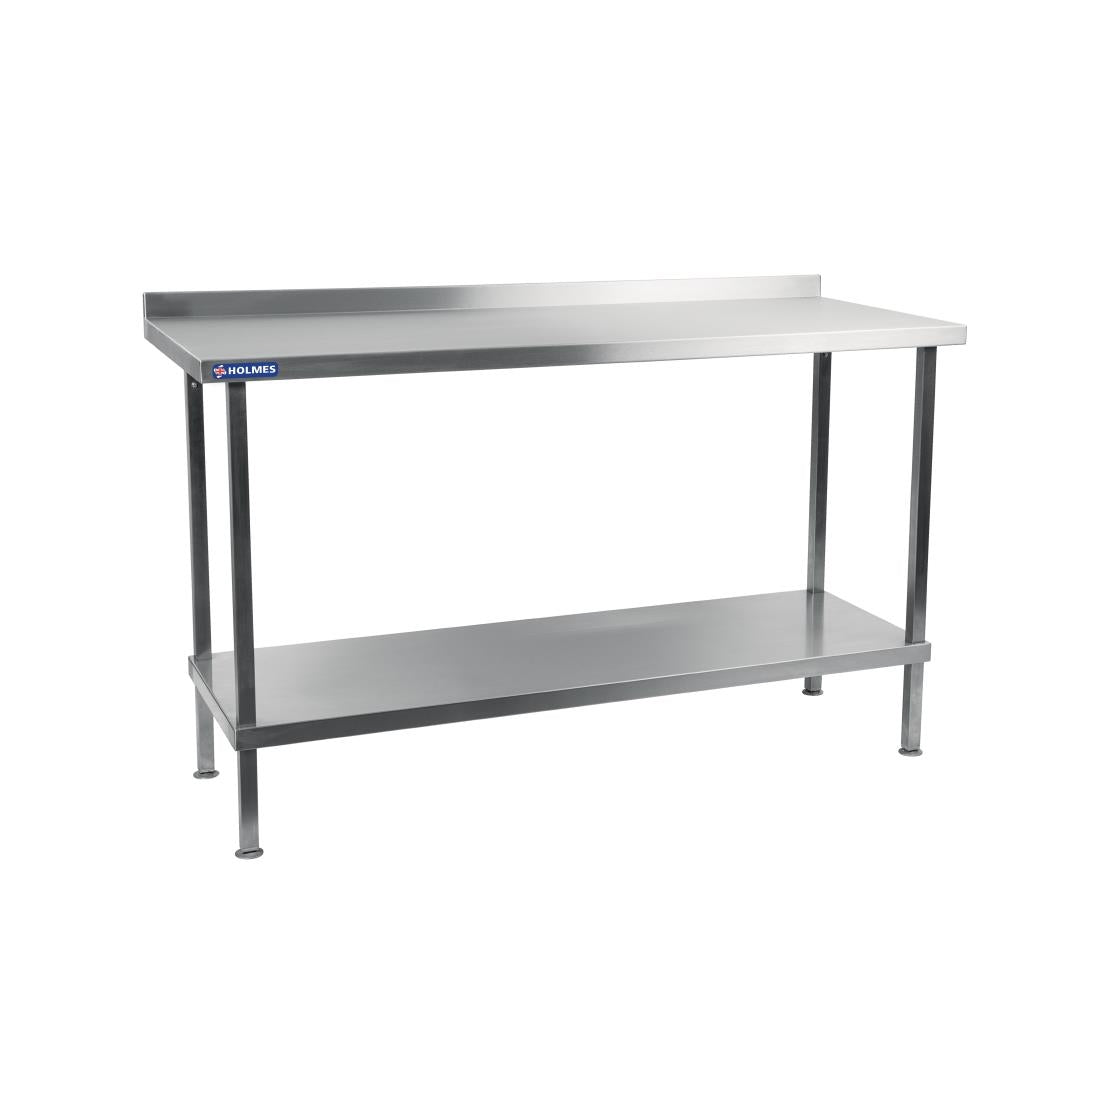 DR029 Holmes Stainless Steel Wall Table with Upstand 1200mm JD Catering Equipment Solutions Ltd